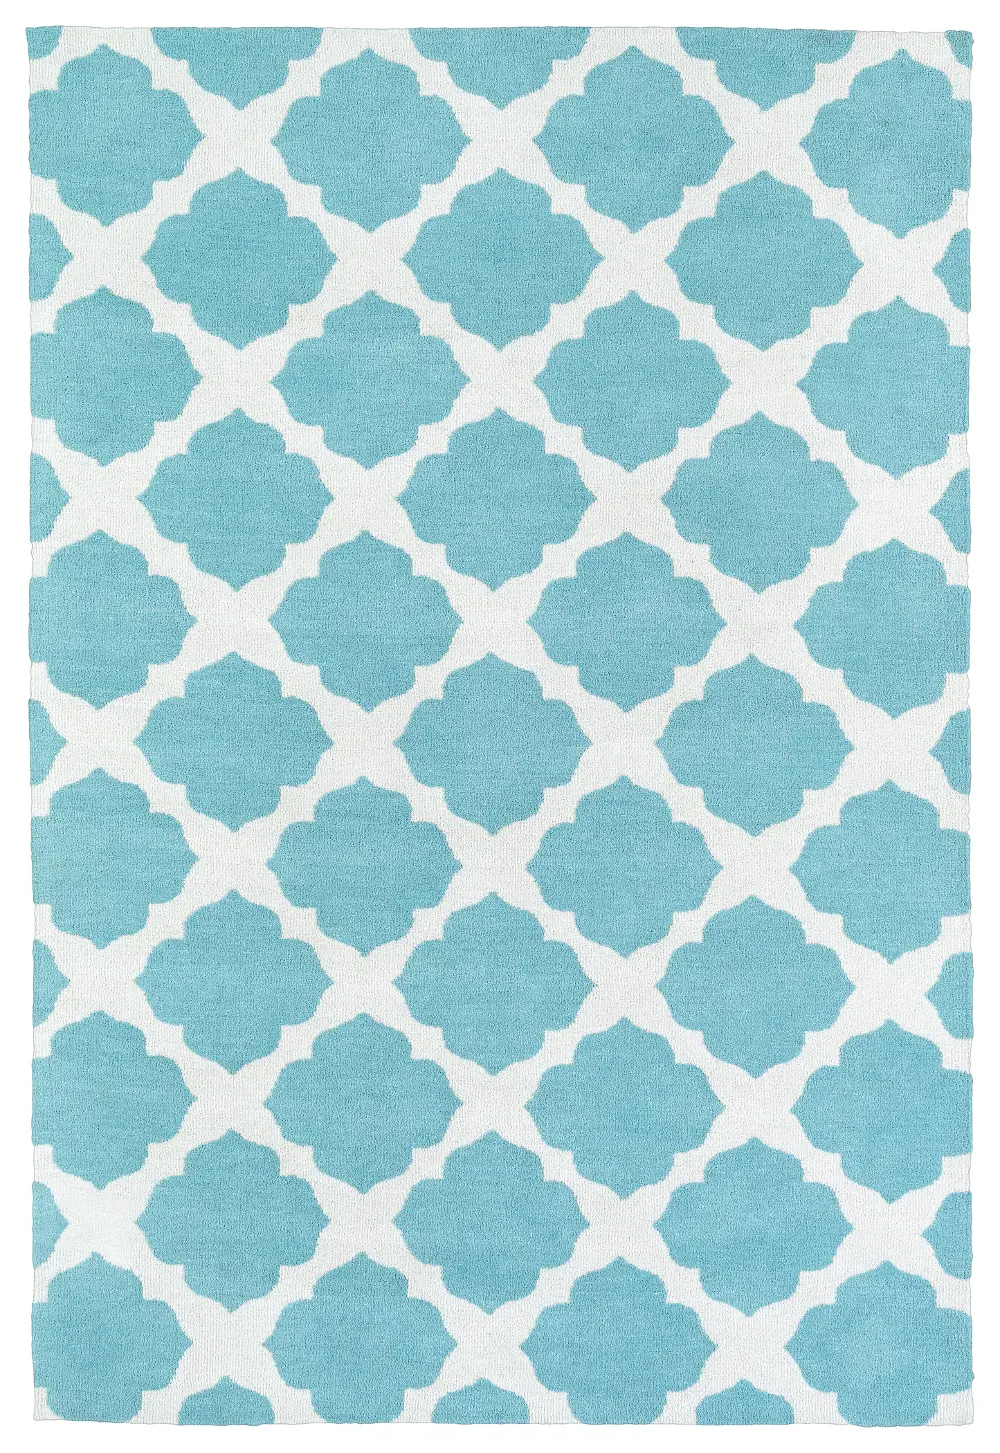 4 x 6 Small Ivory and Turquoise Blue Rug - Lily & Liam-1